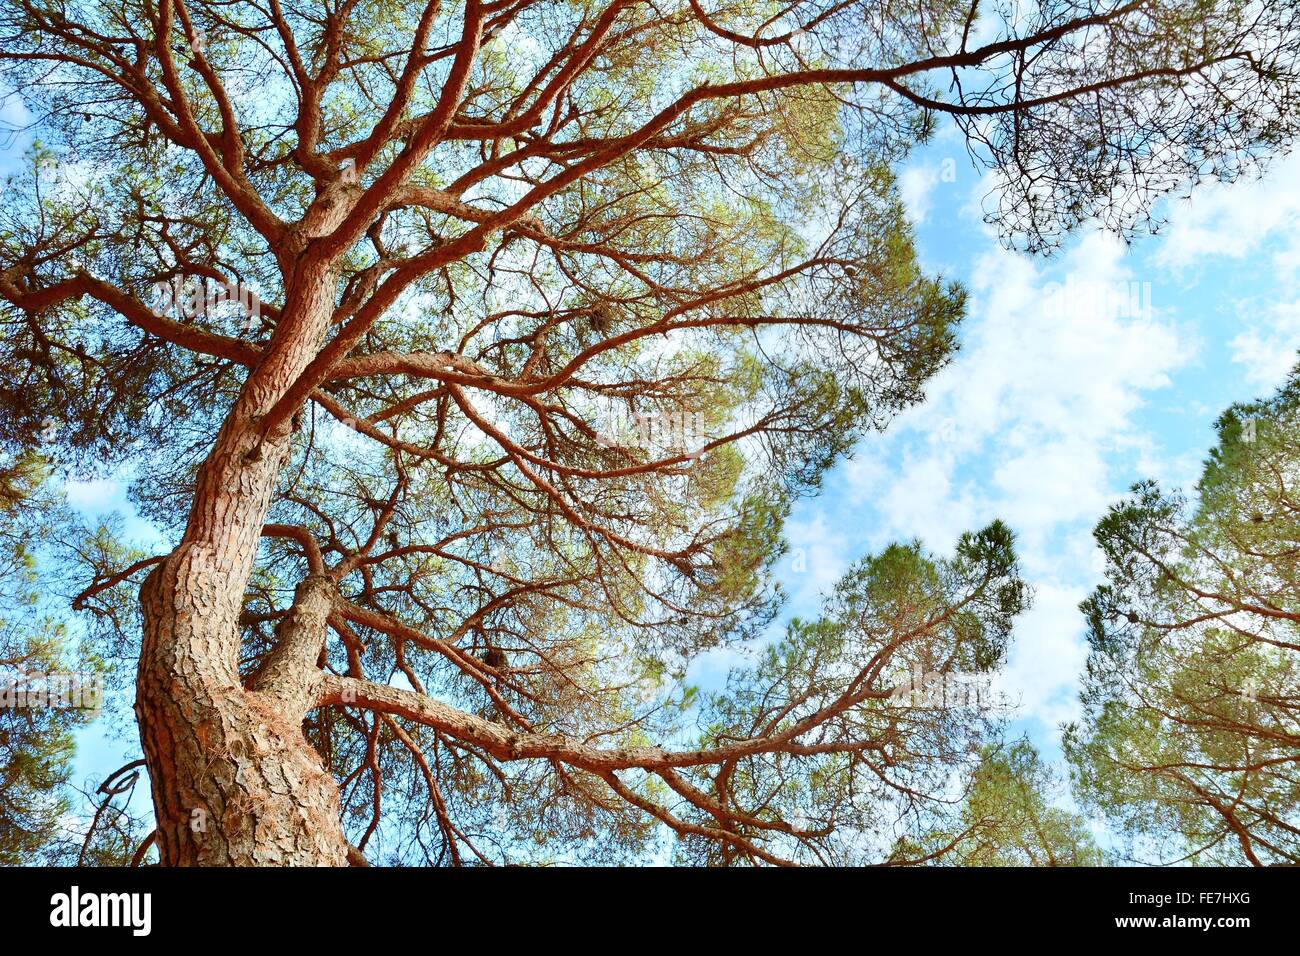 Pine tree crown. HDR shot with blue sky and white clouds. View from the ground up. Stock Photo